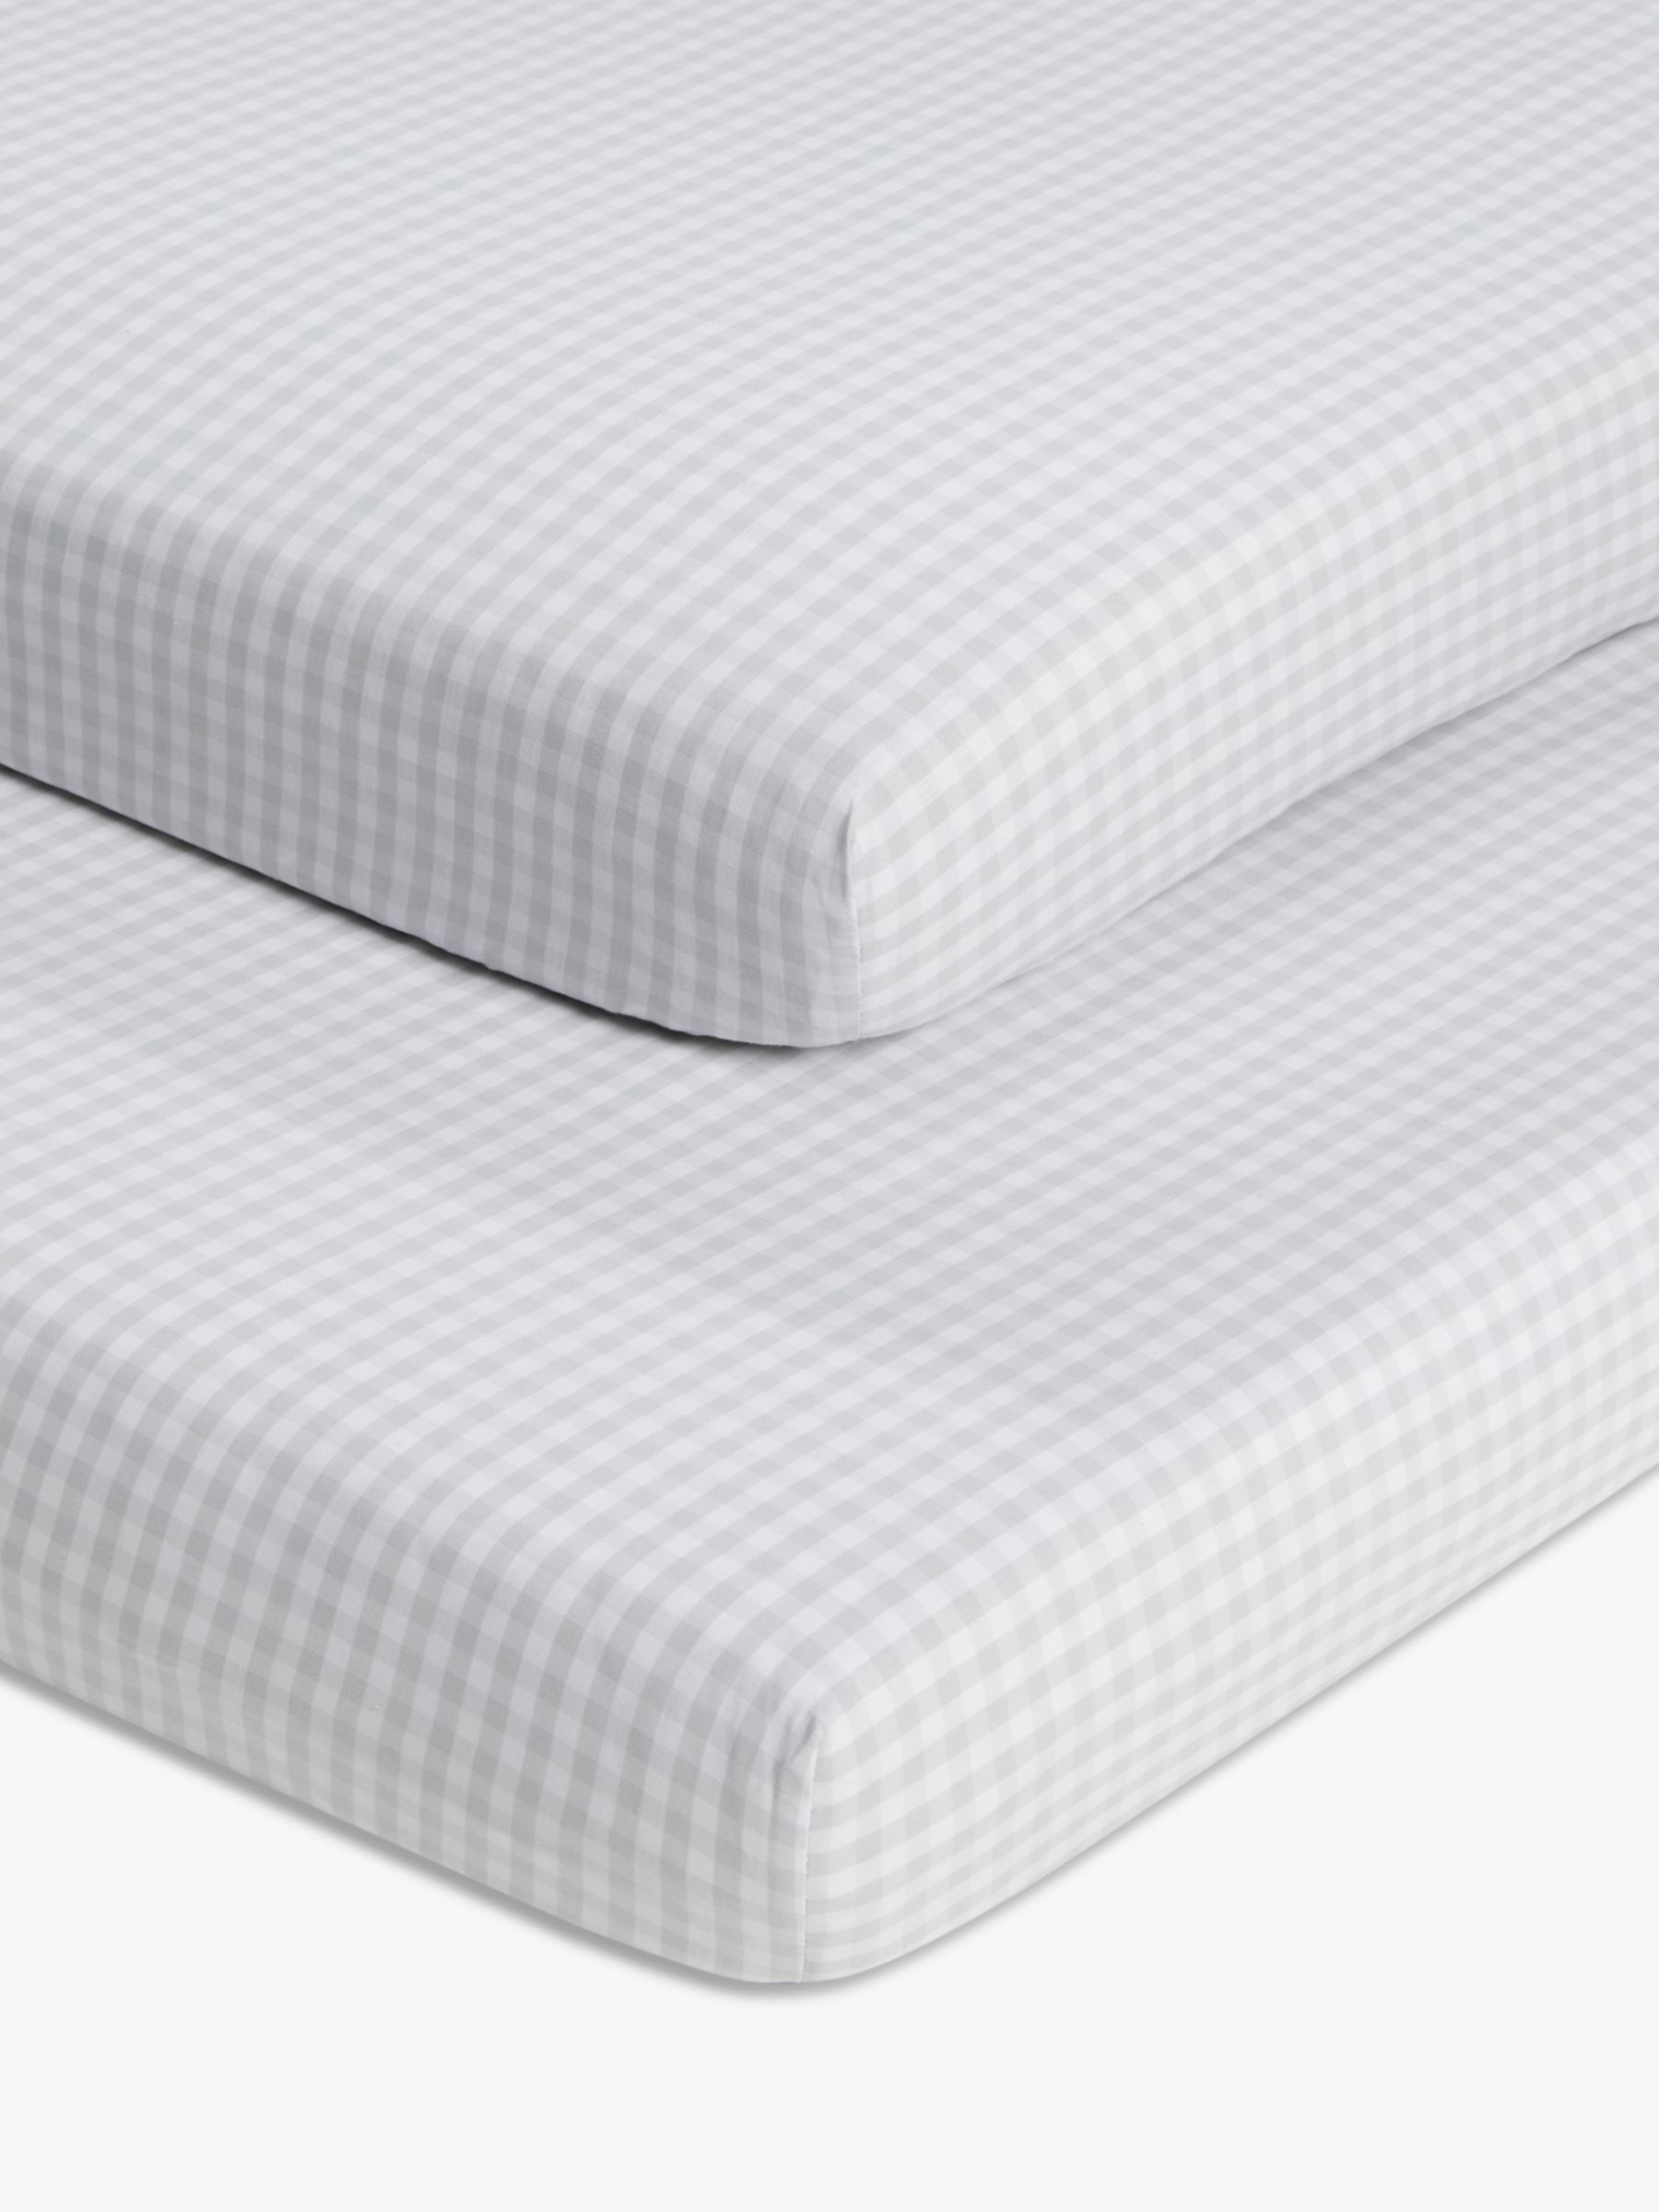 John Lewis Gingham Pure Cotton Fitted Cotbed Sheet, Pack of 2